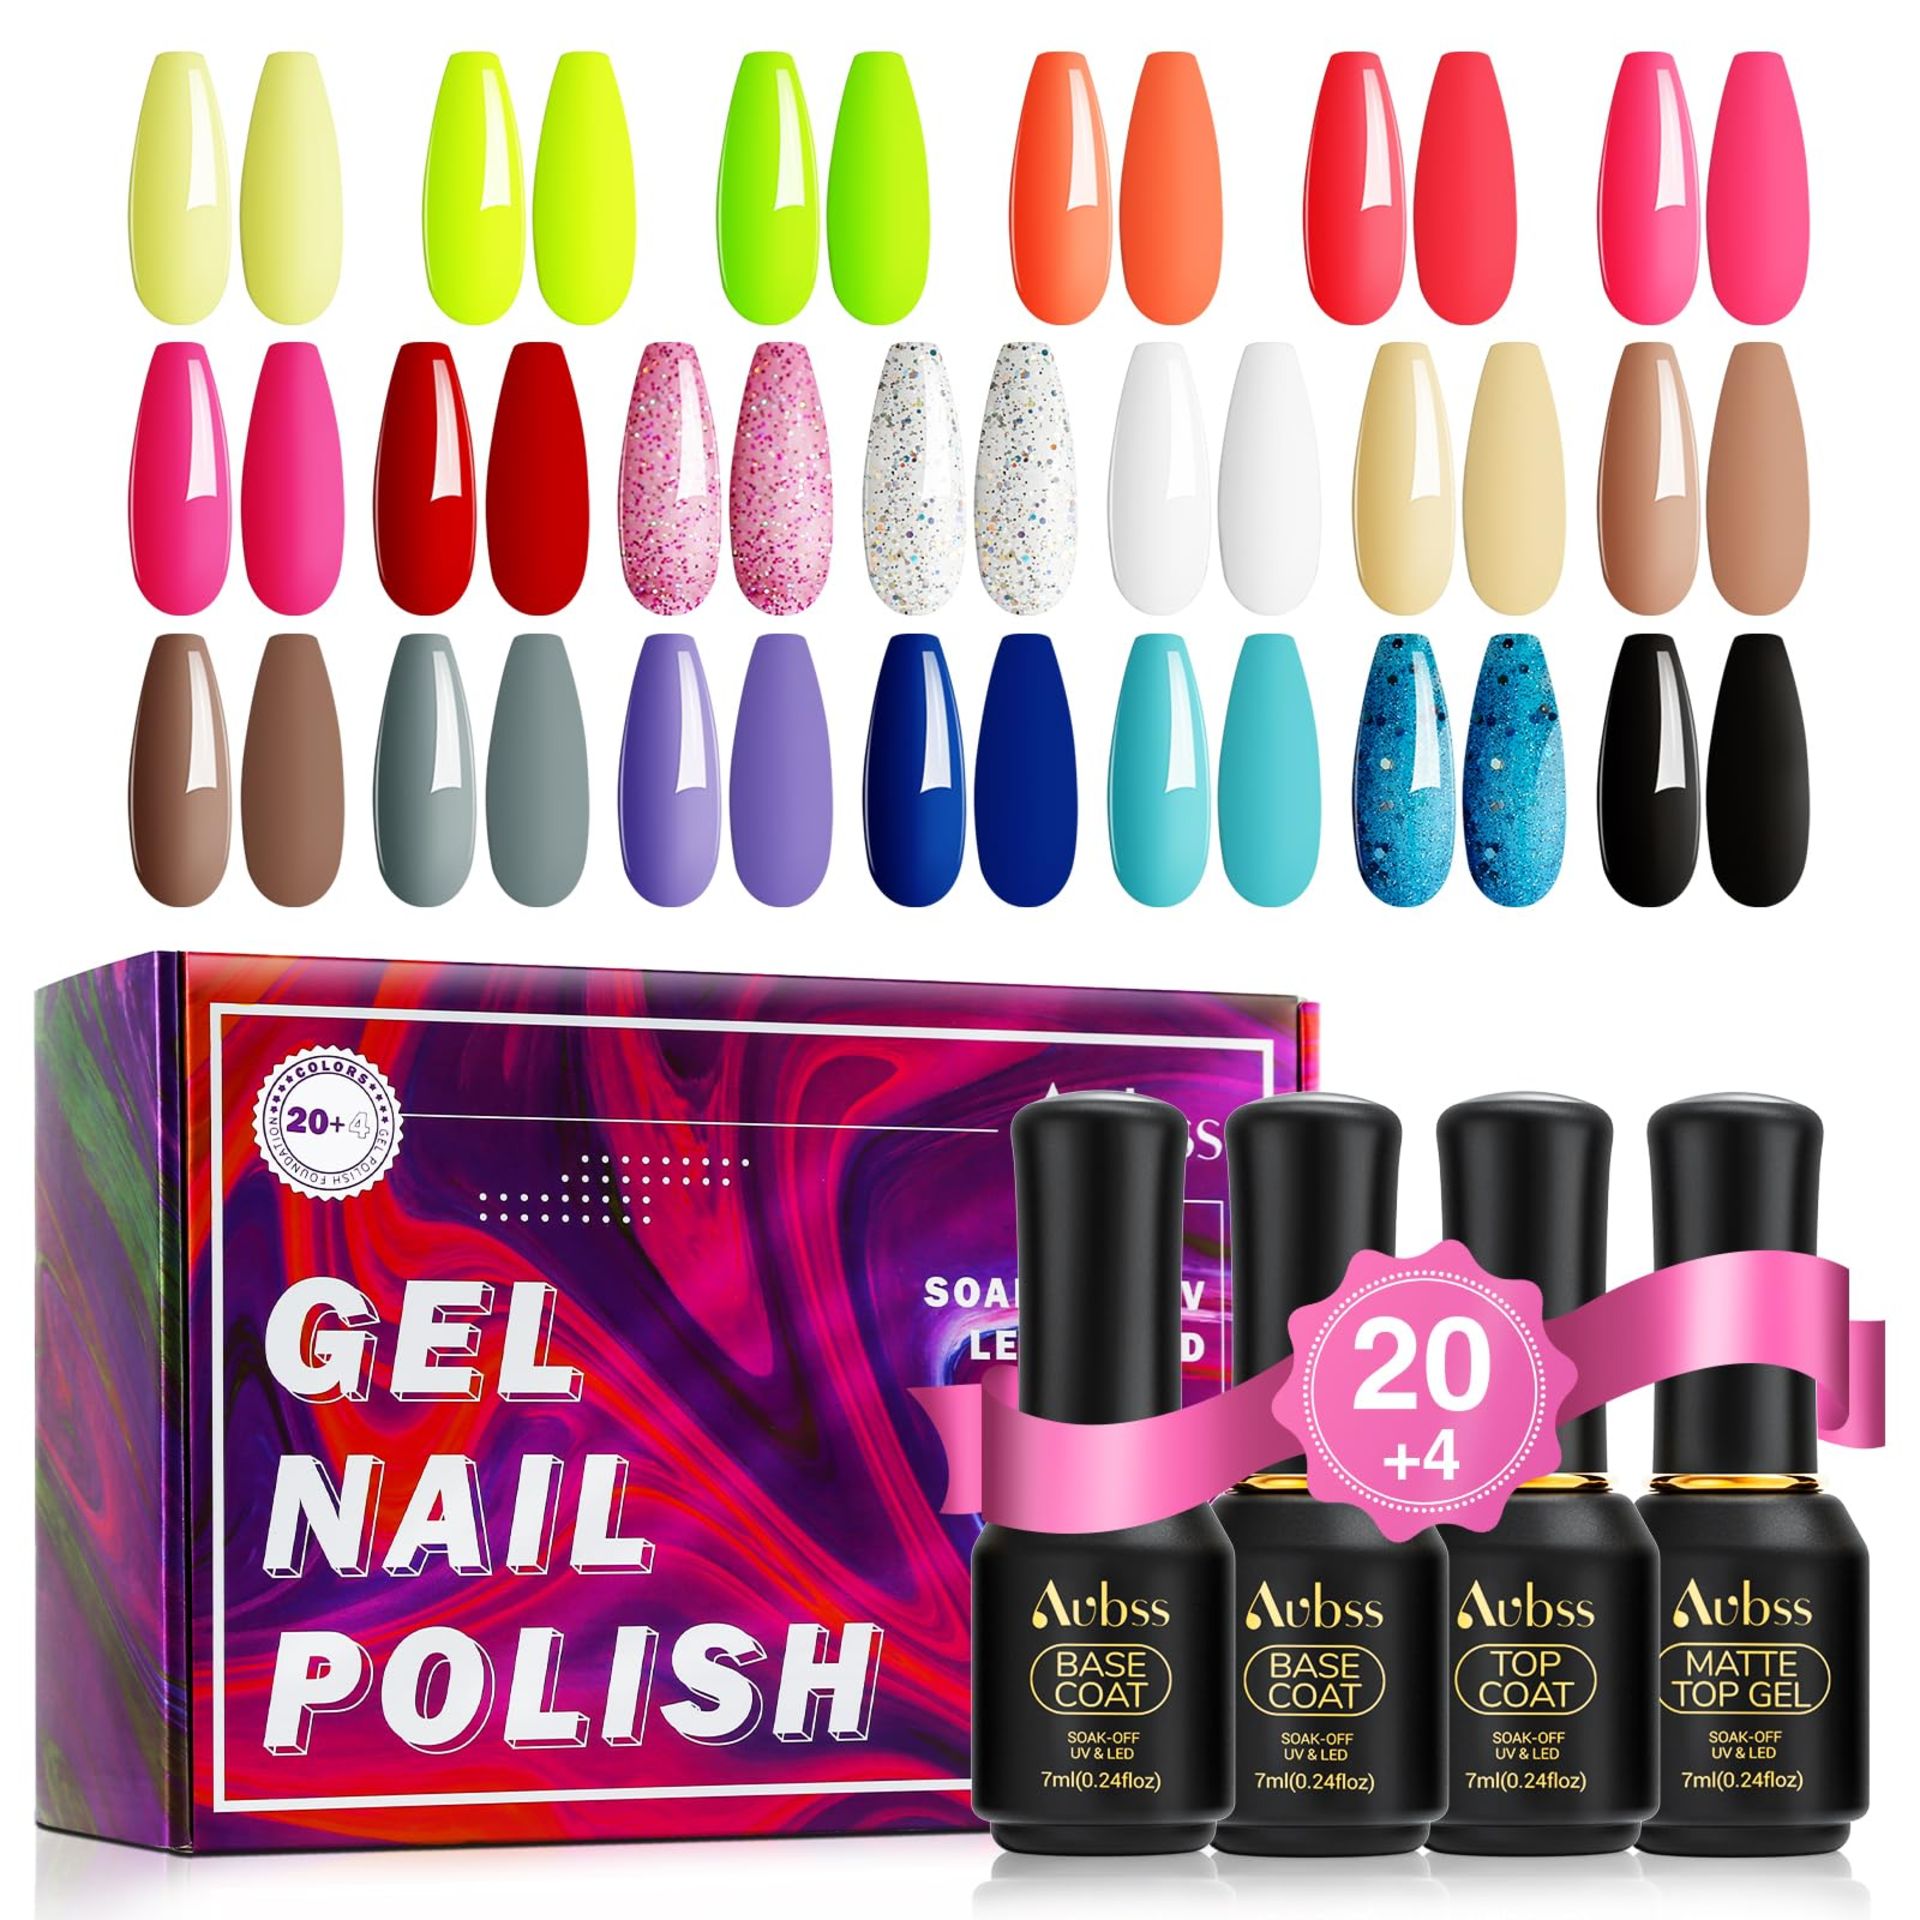 RRP £34.38 Total, Lot Consisting of 2 Brand New Items - See Description.